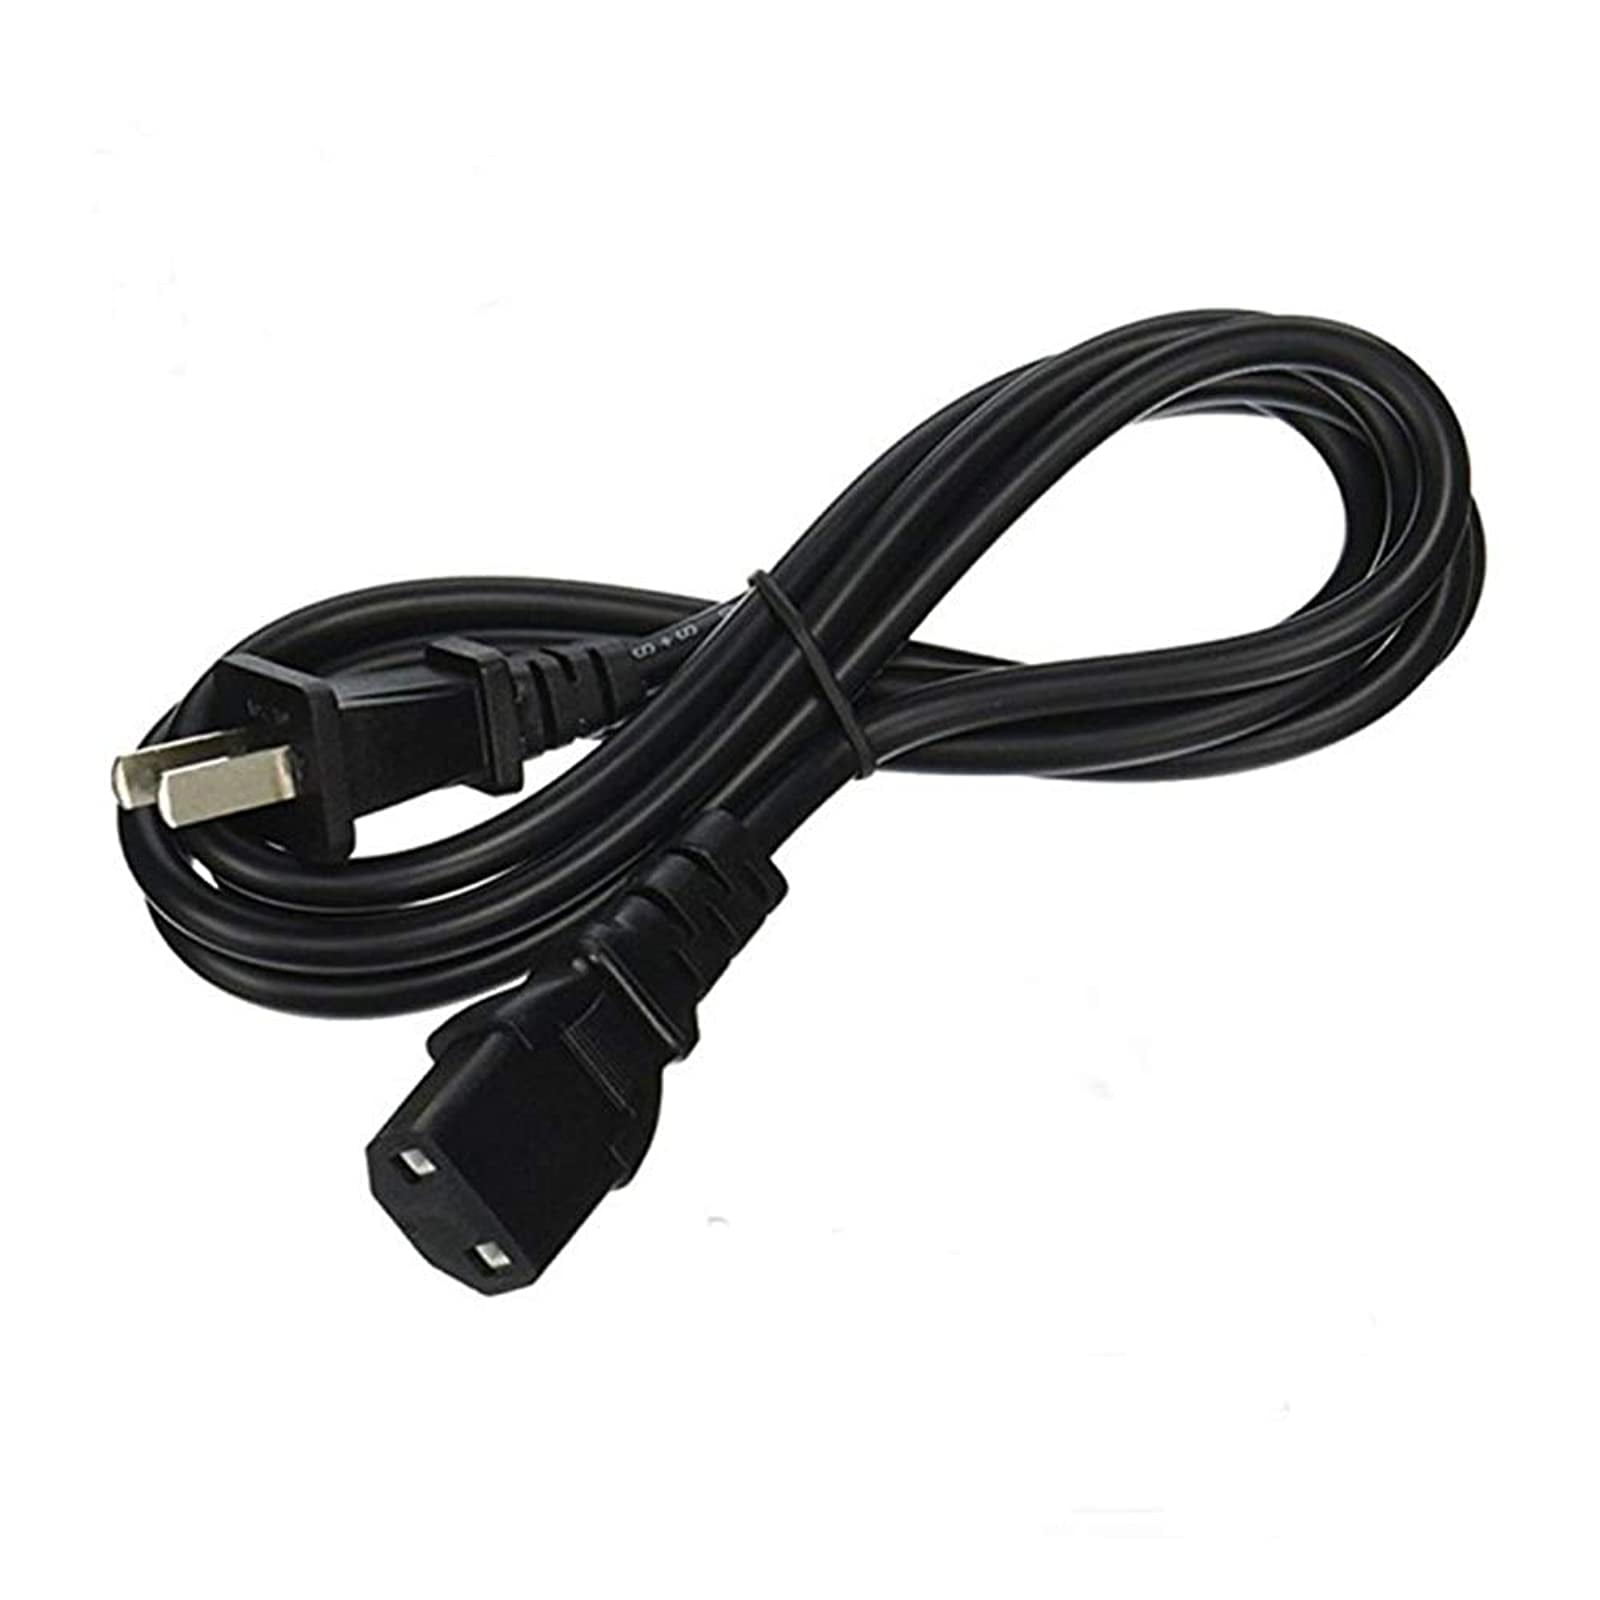 ecstasy måtte beskyldninger 2 Prong AC Power Cord Cable For Sony PS4 Pro PlayStation 4 Pro Xbox One -  Walmart.com